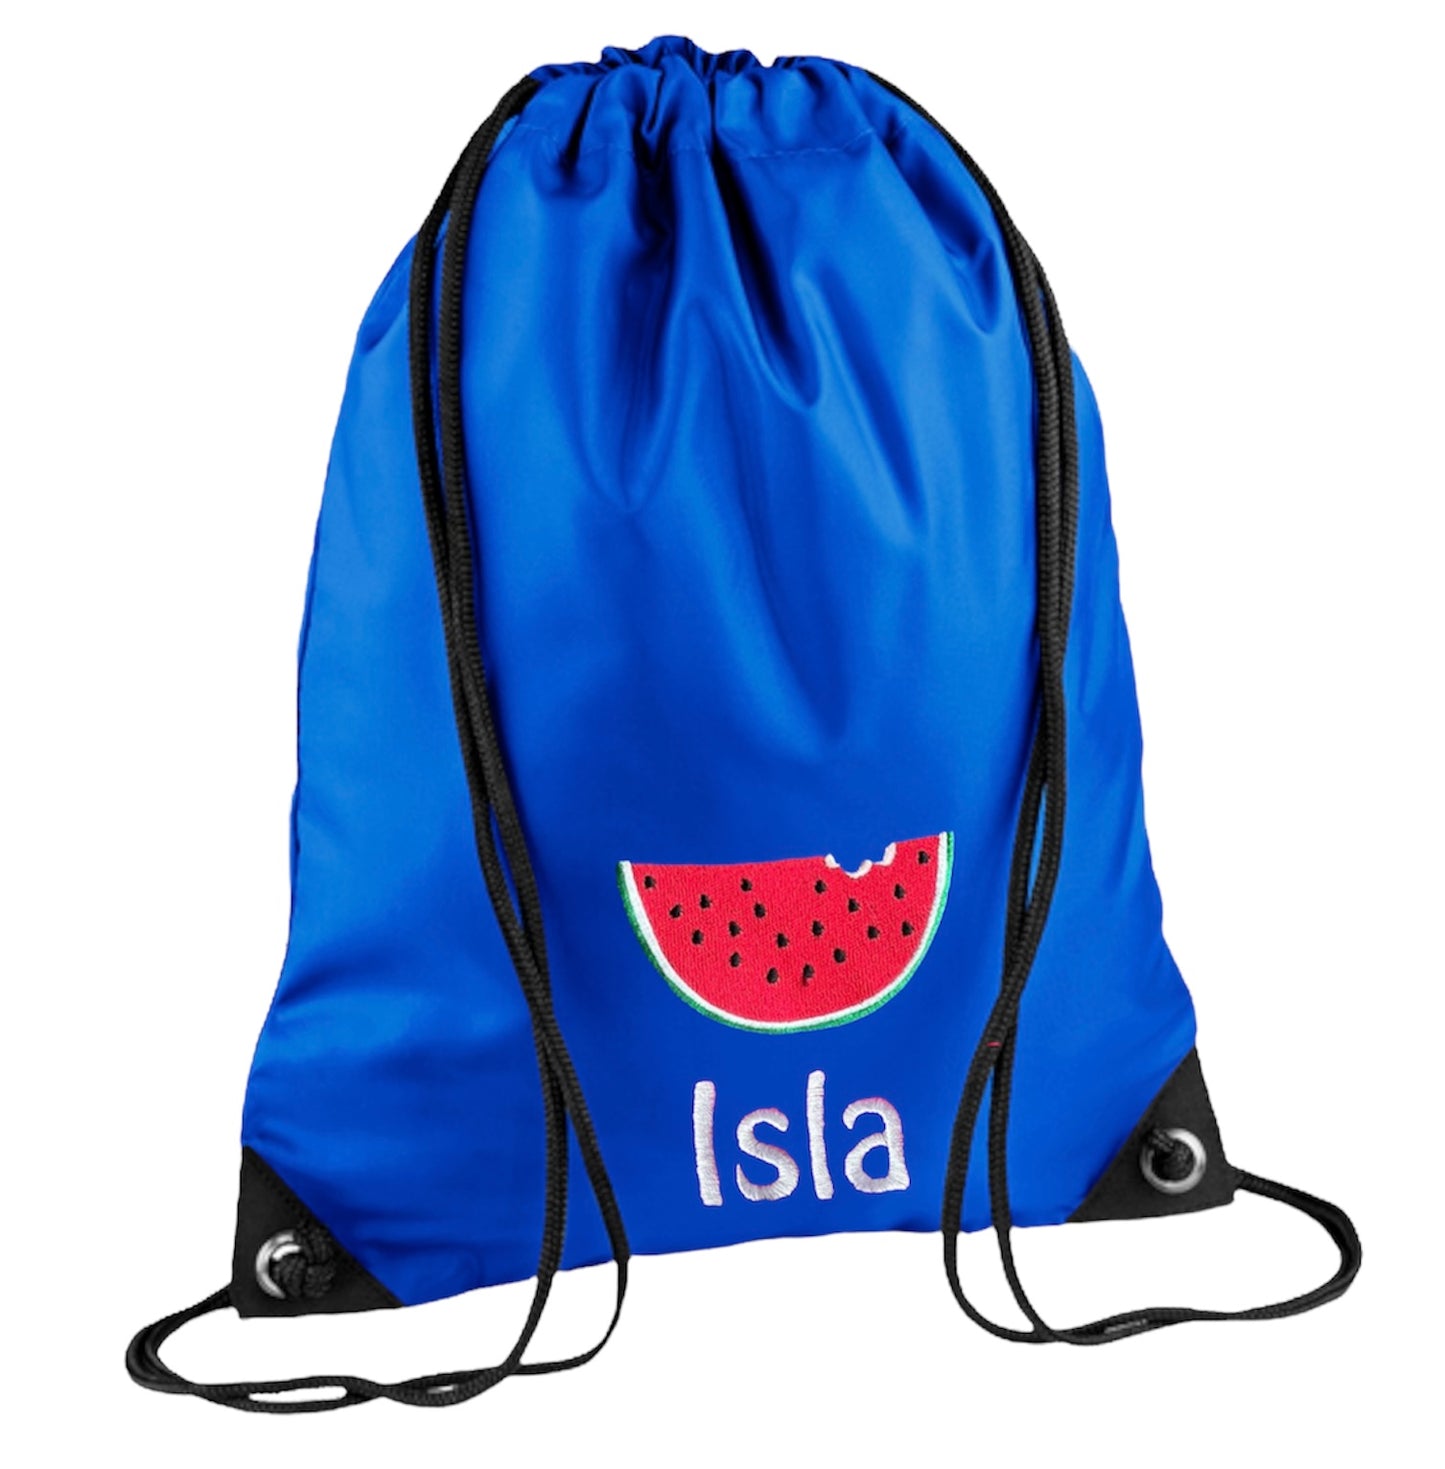 Embroidered PE bag - Watermelon